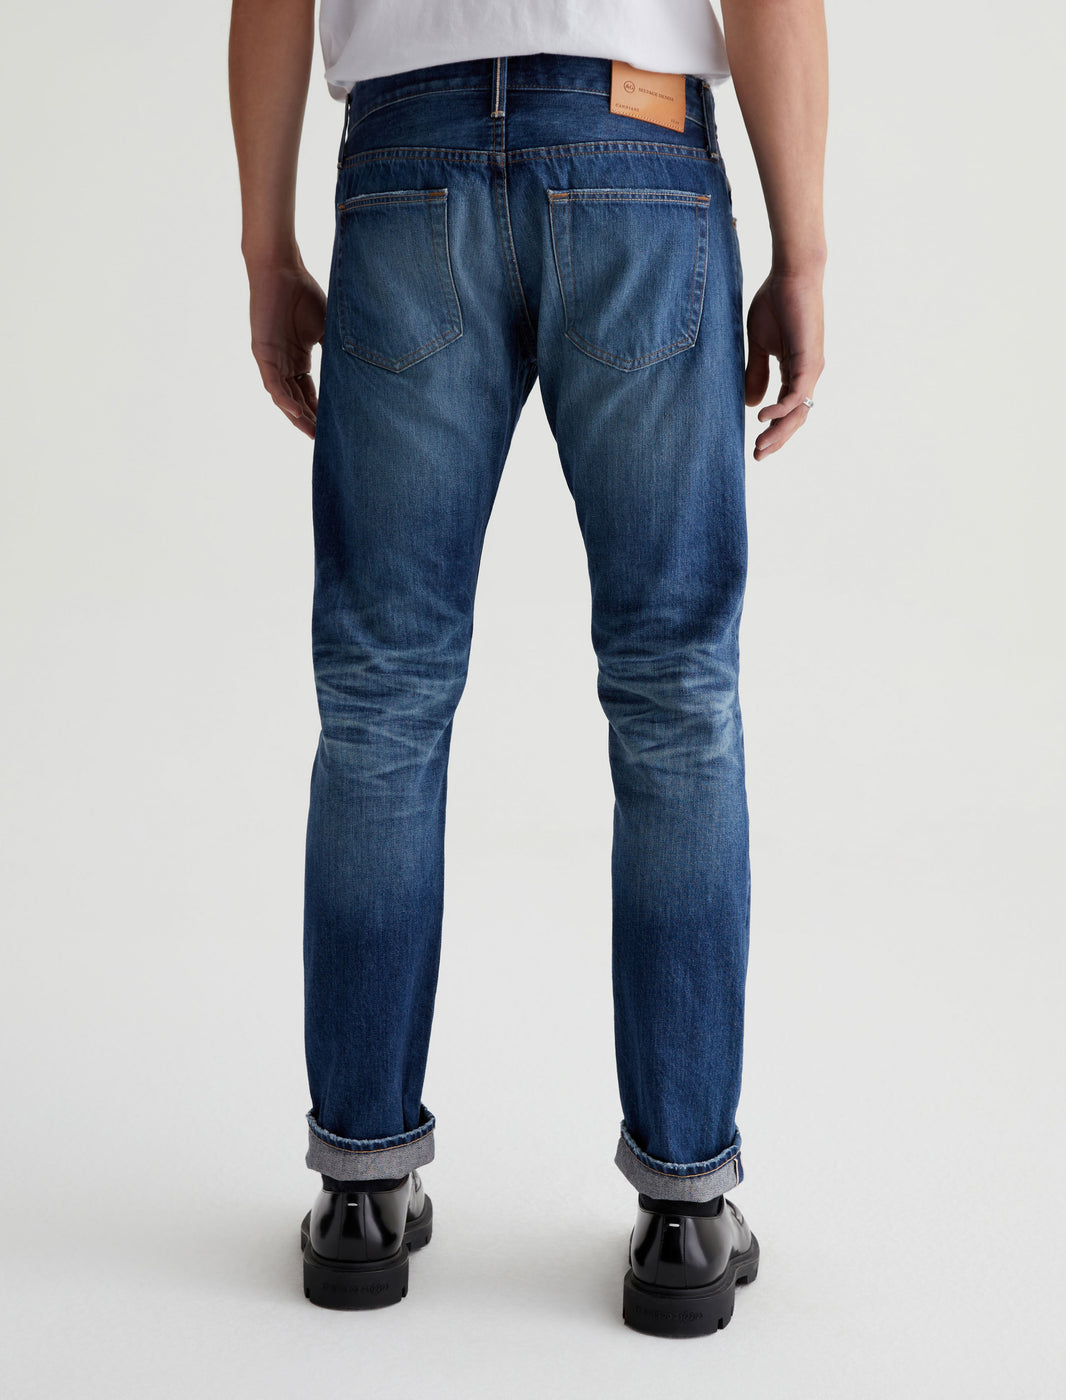 Jeans Miyagi 10 Store Mens Official Tellis at Selvage AG Years